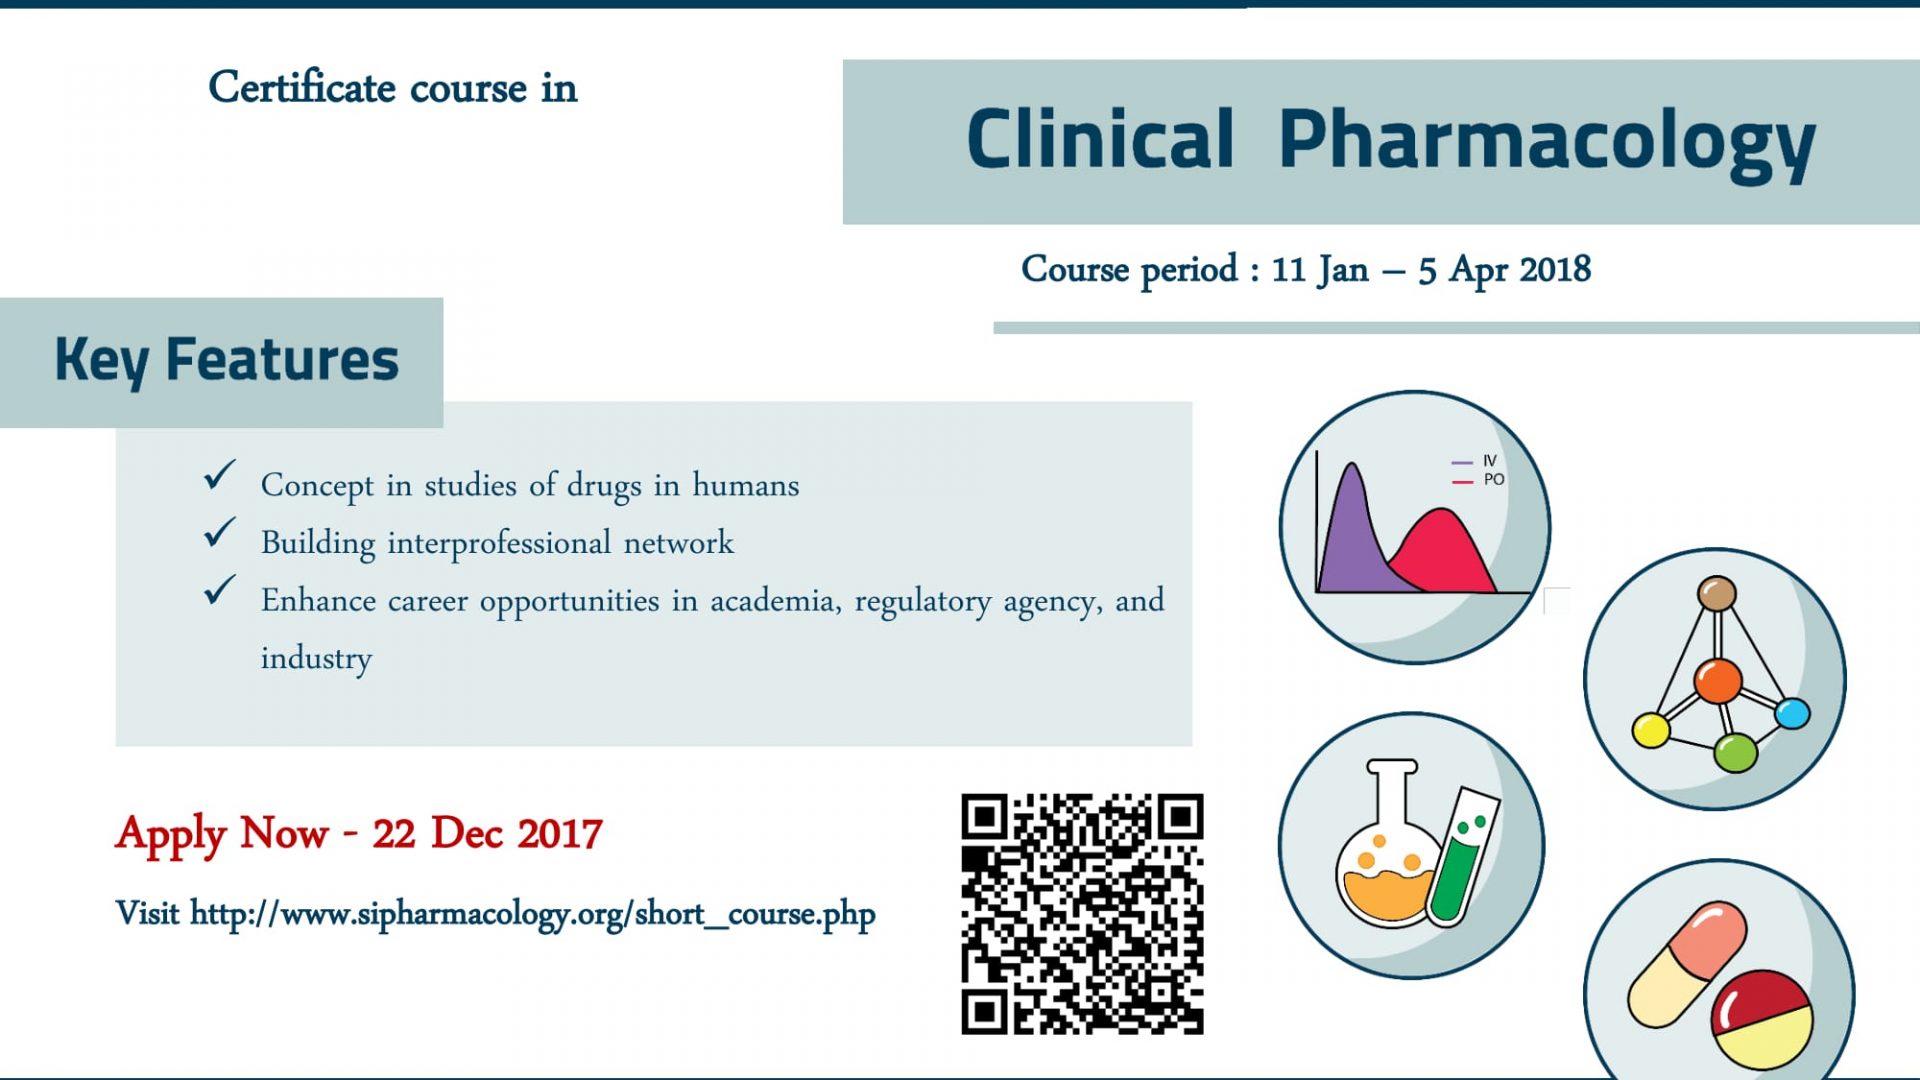 Certificate Course in Clinical Pharmacology (Apply now – December 22, 2017)